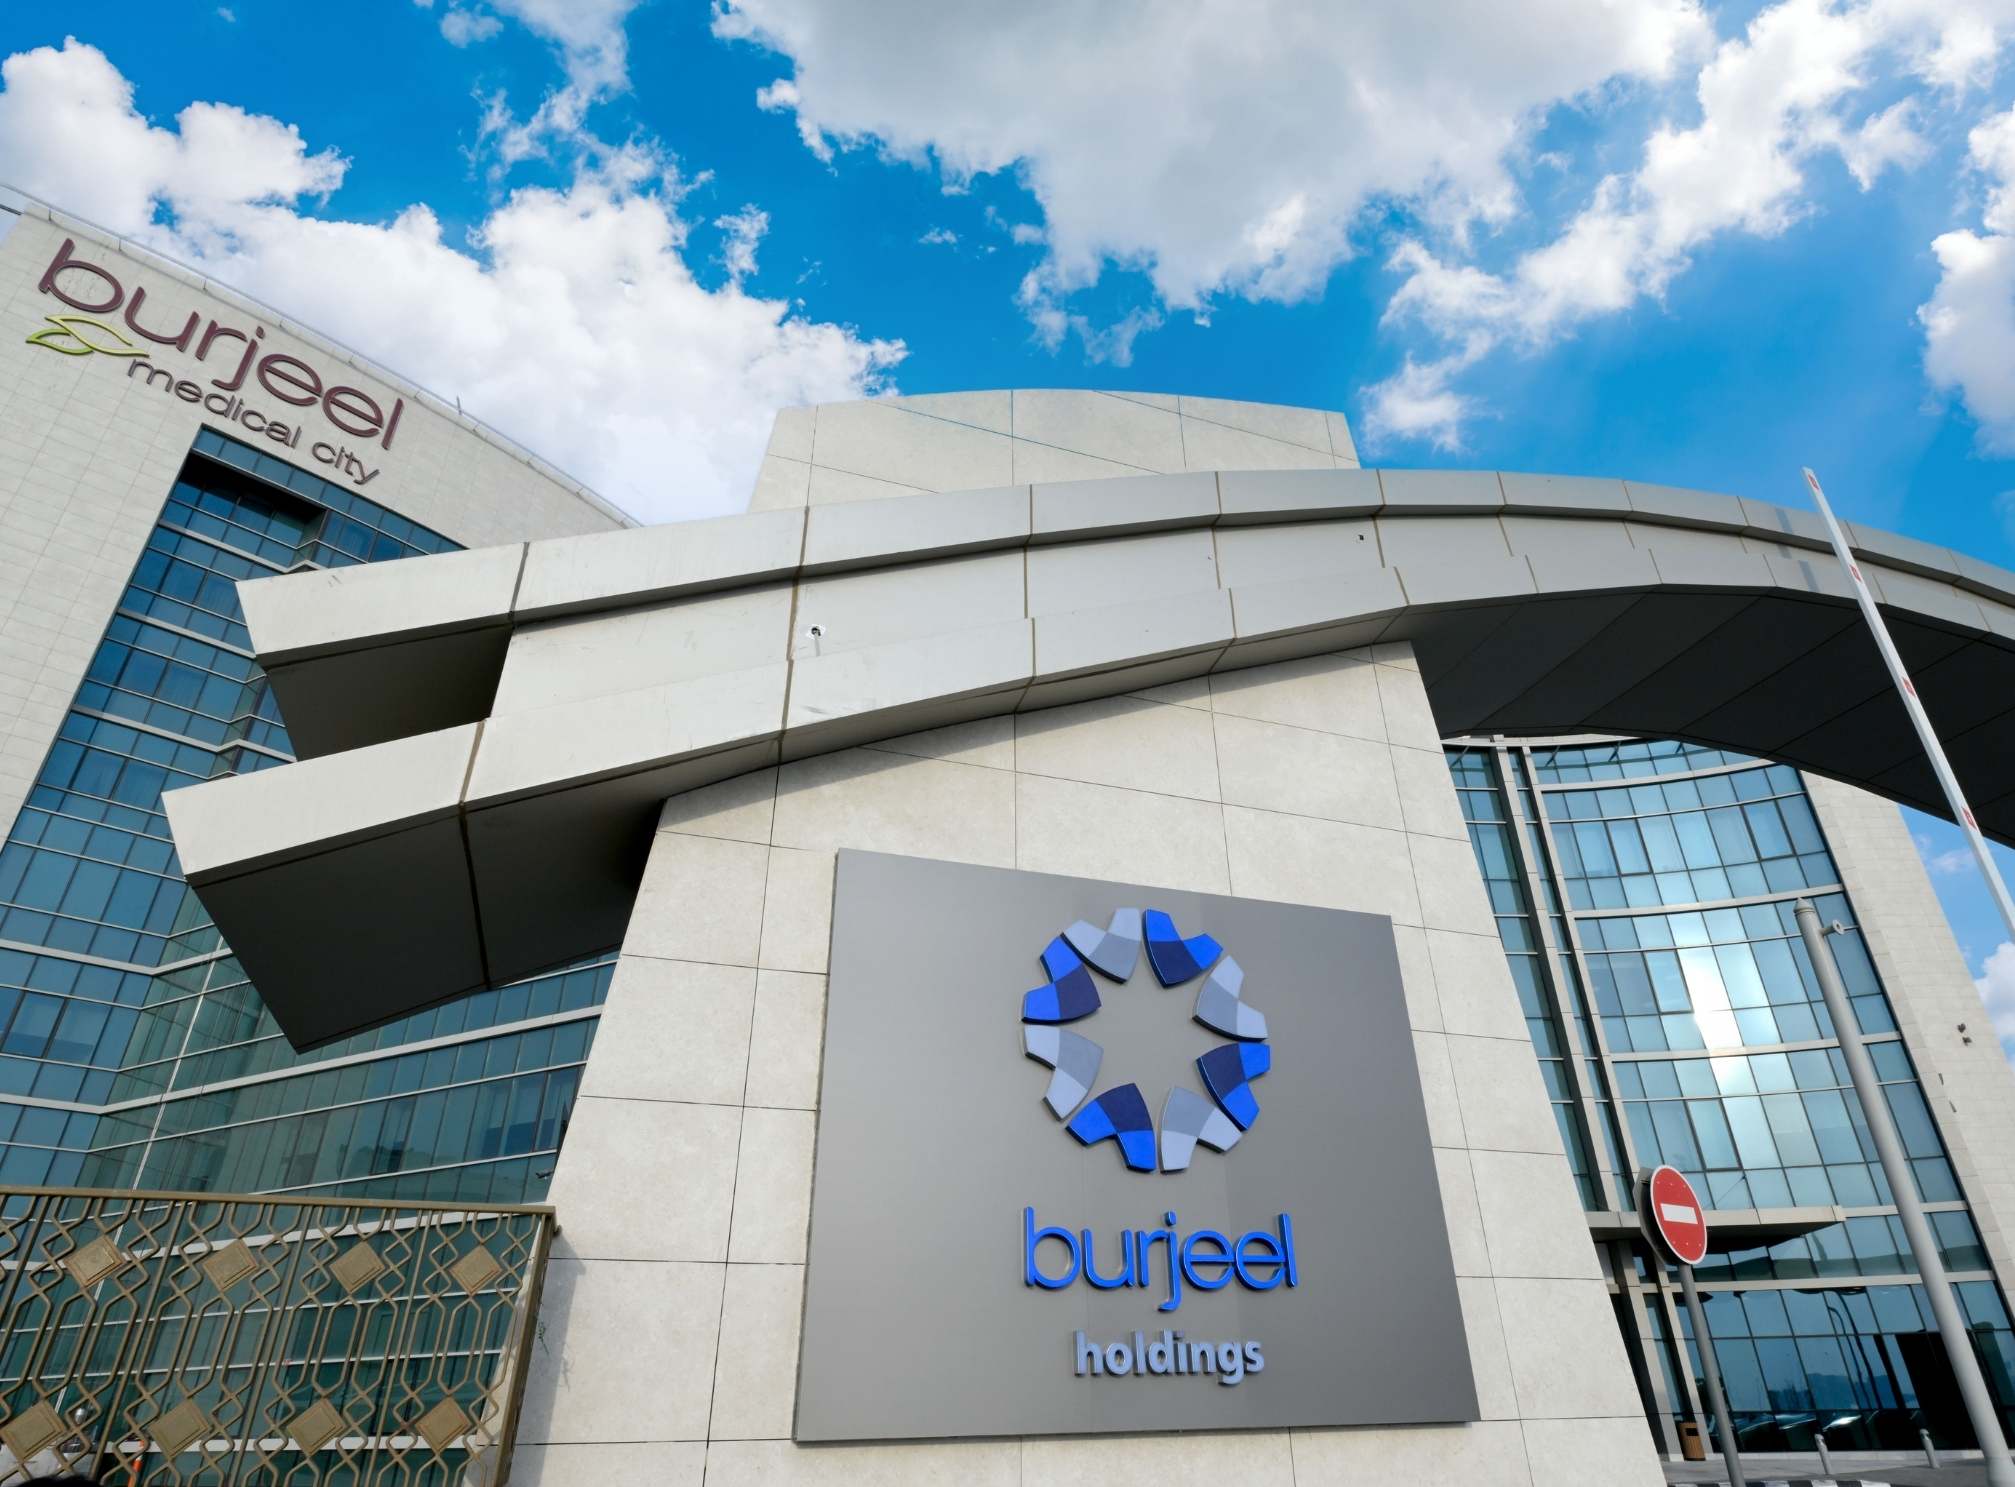 Burjeel Holdings announces intention to list on main market of the Abu Dhabi Securities Exchange (ADX) via an Initial Public Offering (IPO)